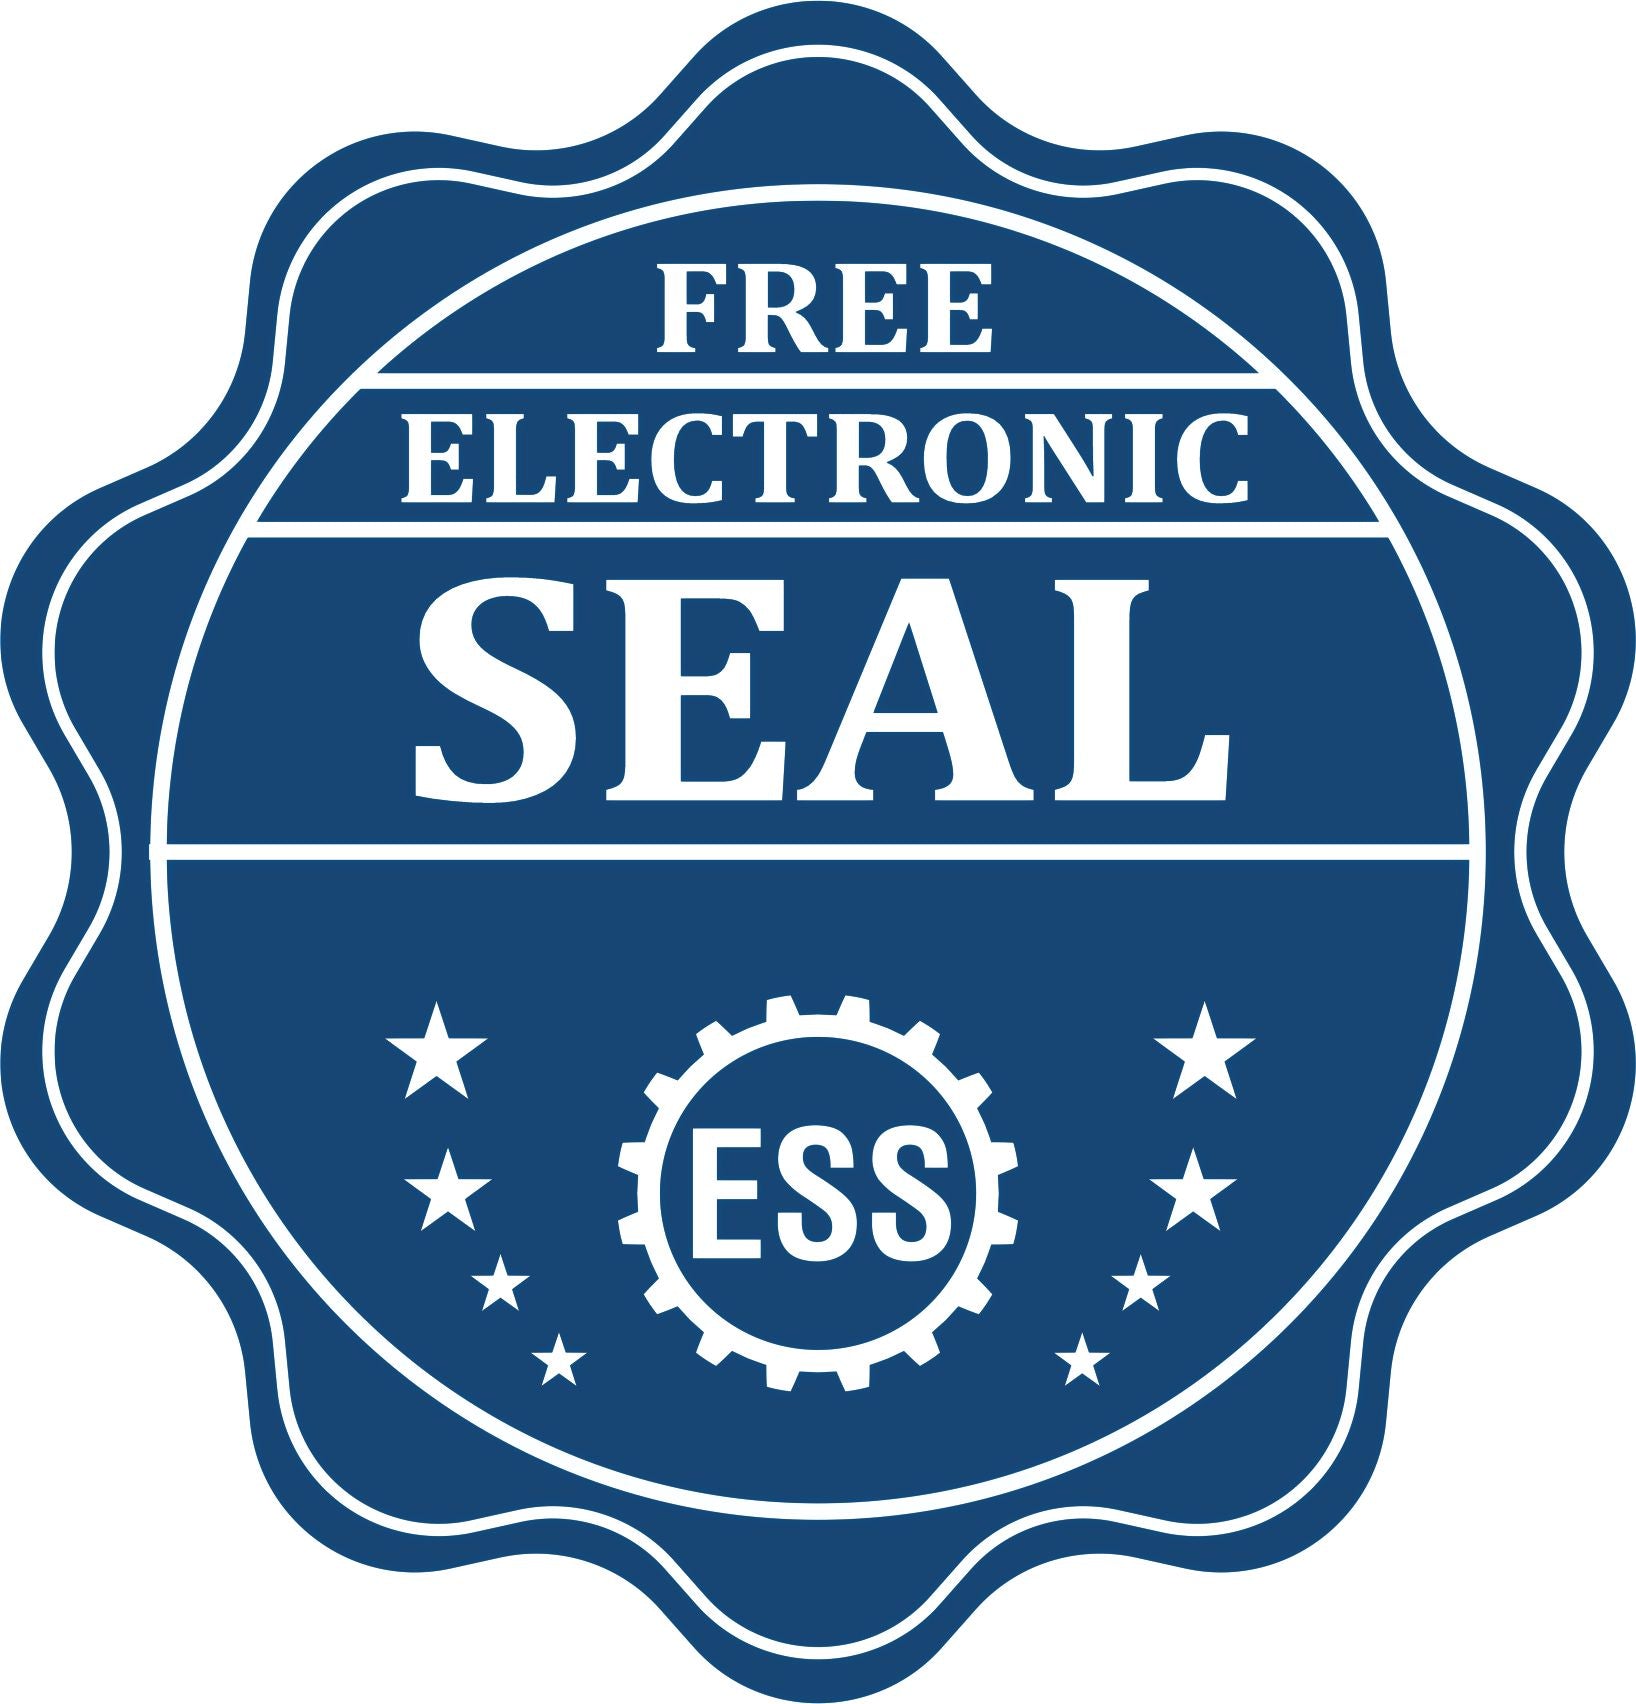 A badge showing a free electronic seal for the MaxLight Premium Pre-Inked New York State Seal Notarial Stamp with stars and the ESS gear on the emblem.